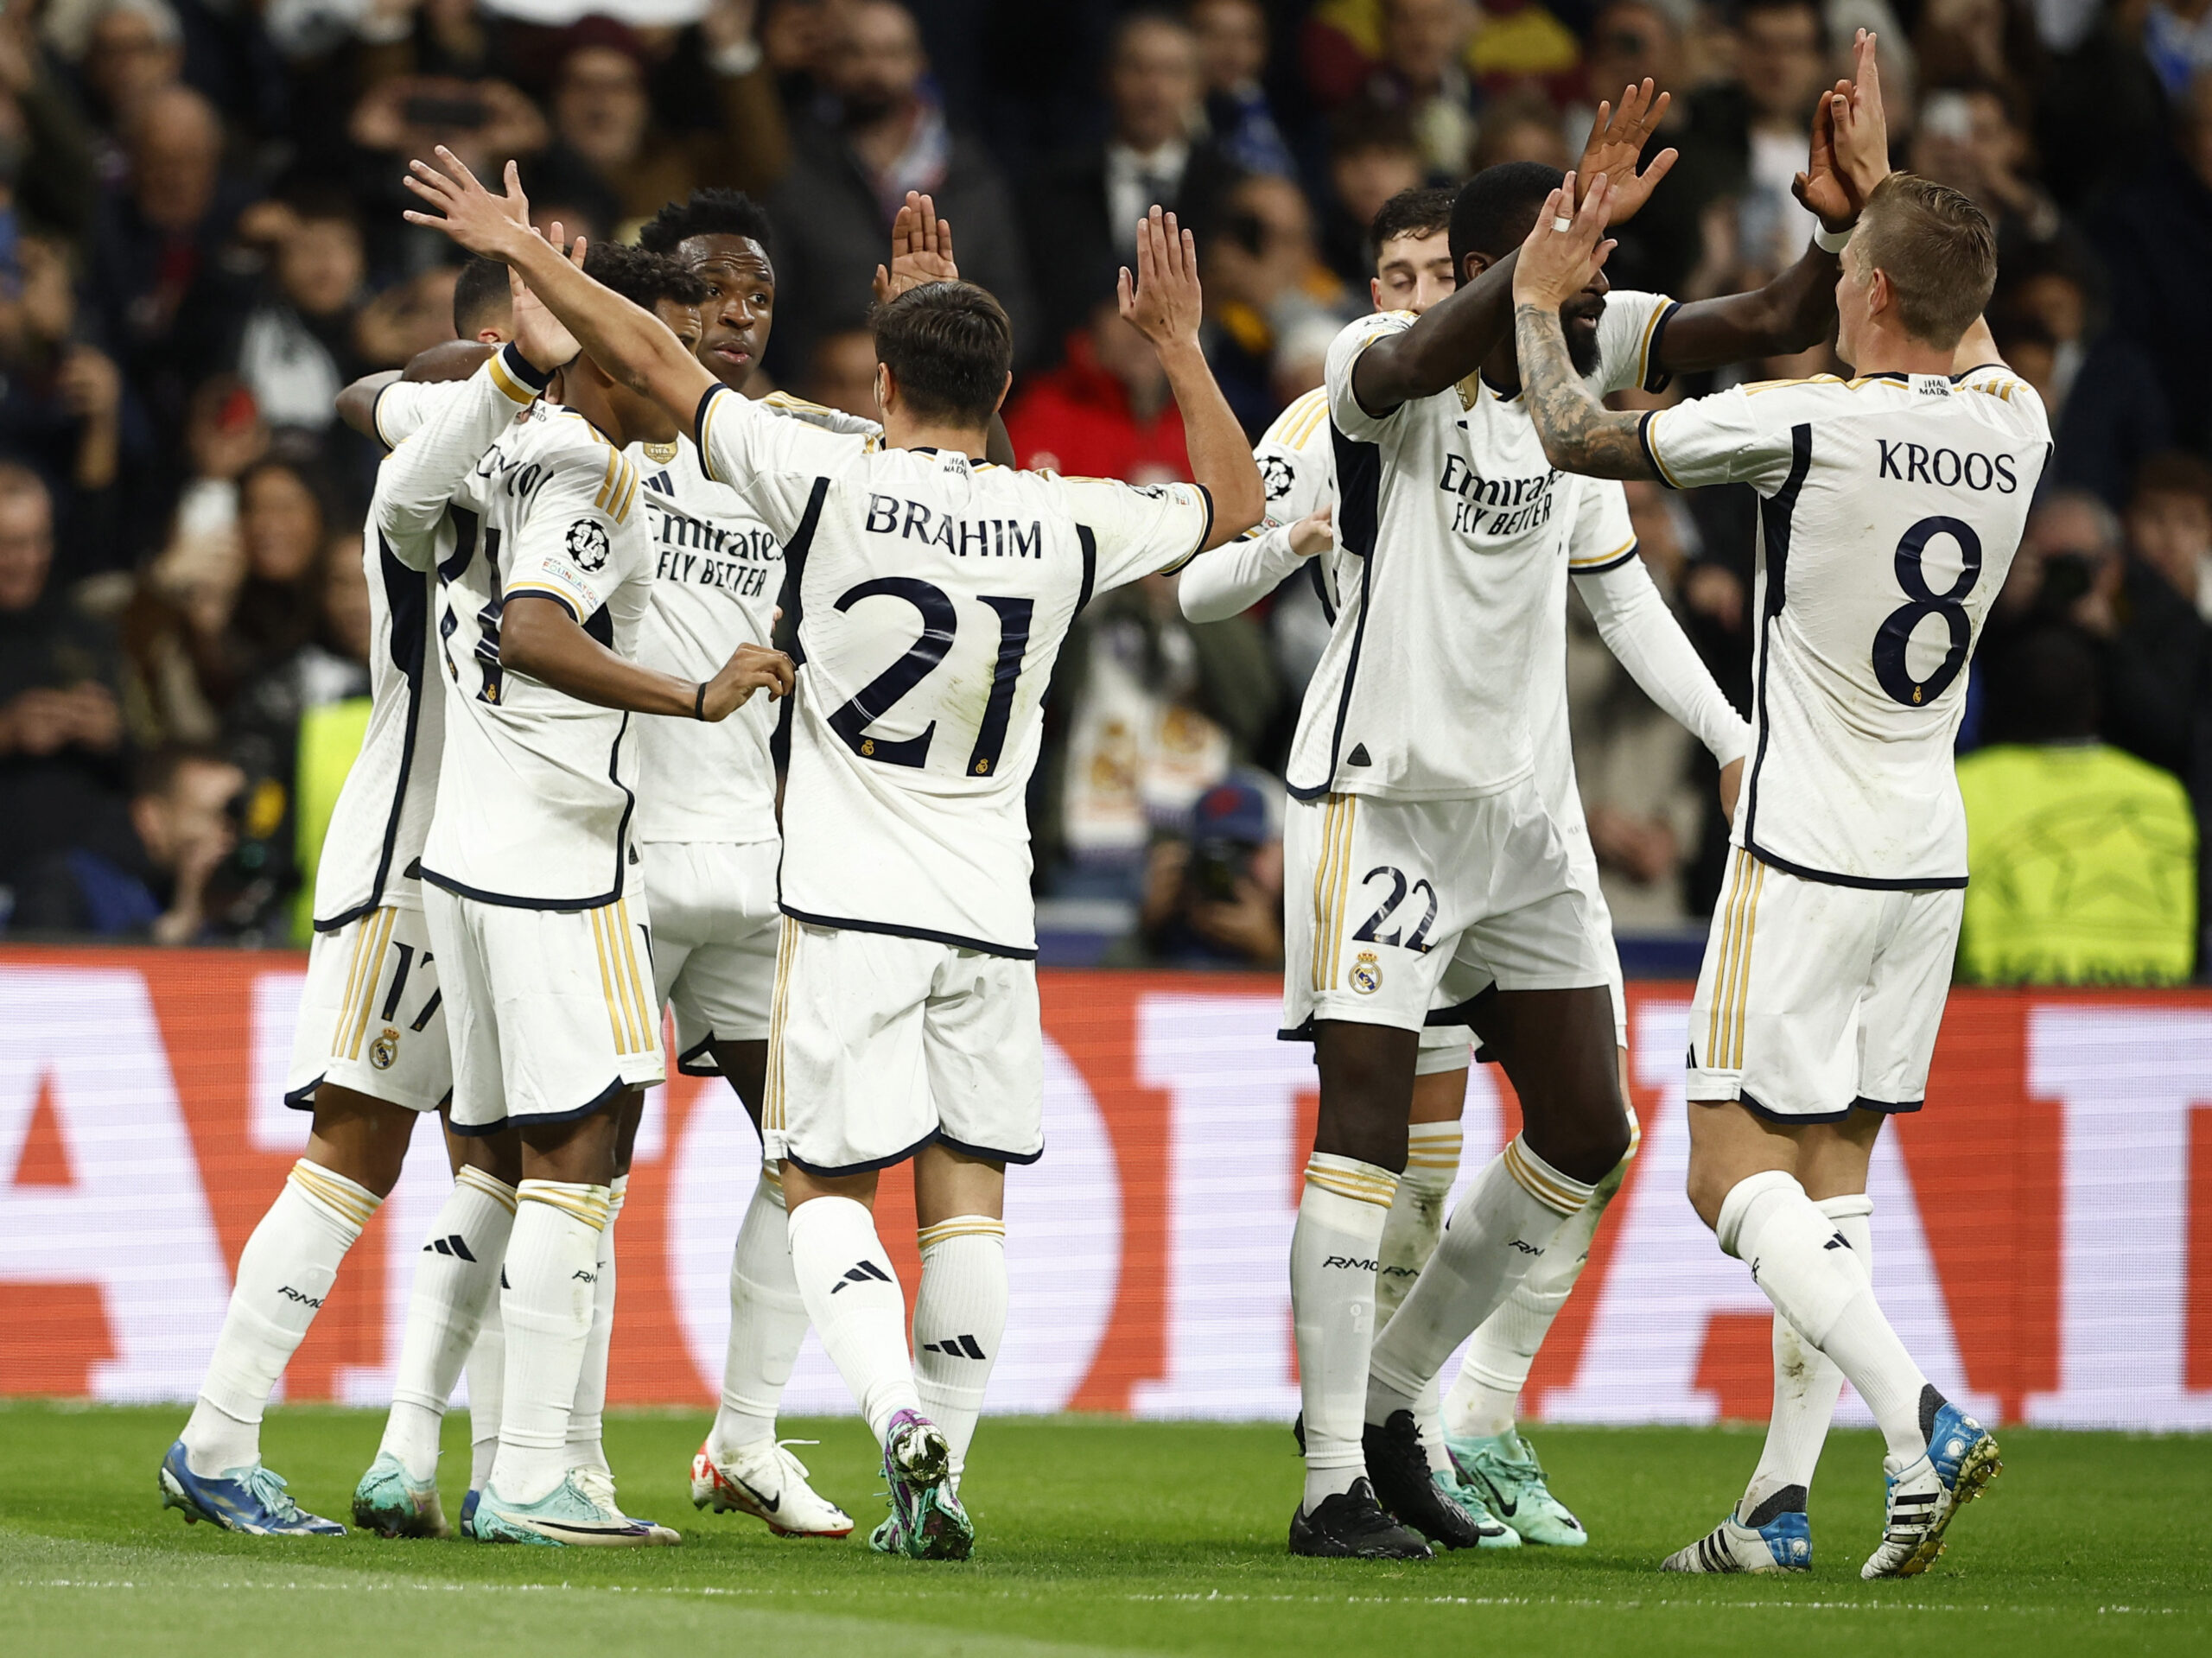 UEFA Champions League: Real Madrid cruise past Sporting Braga to reach last 16